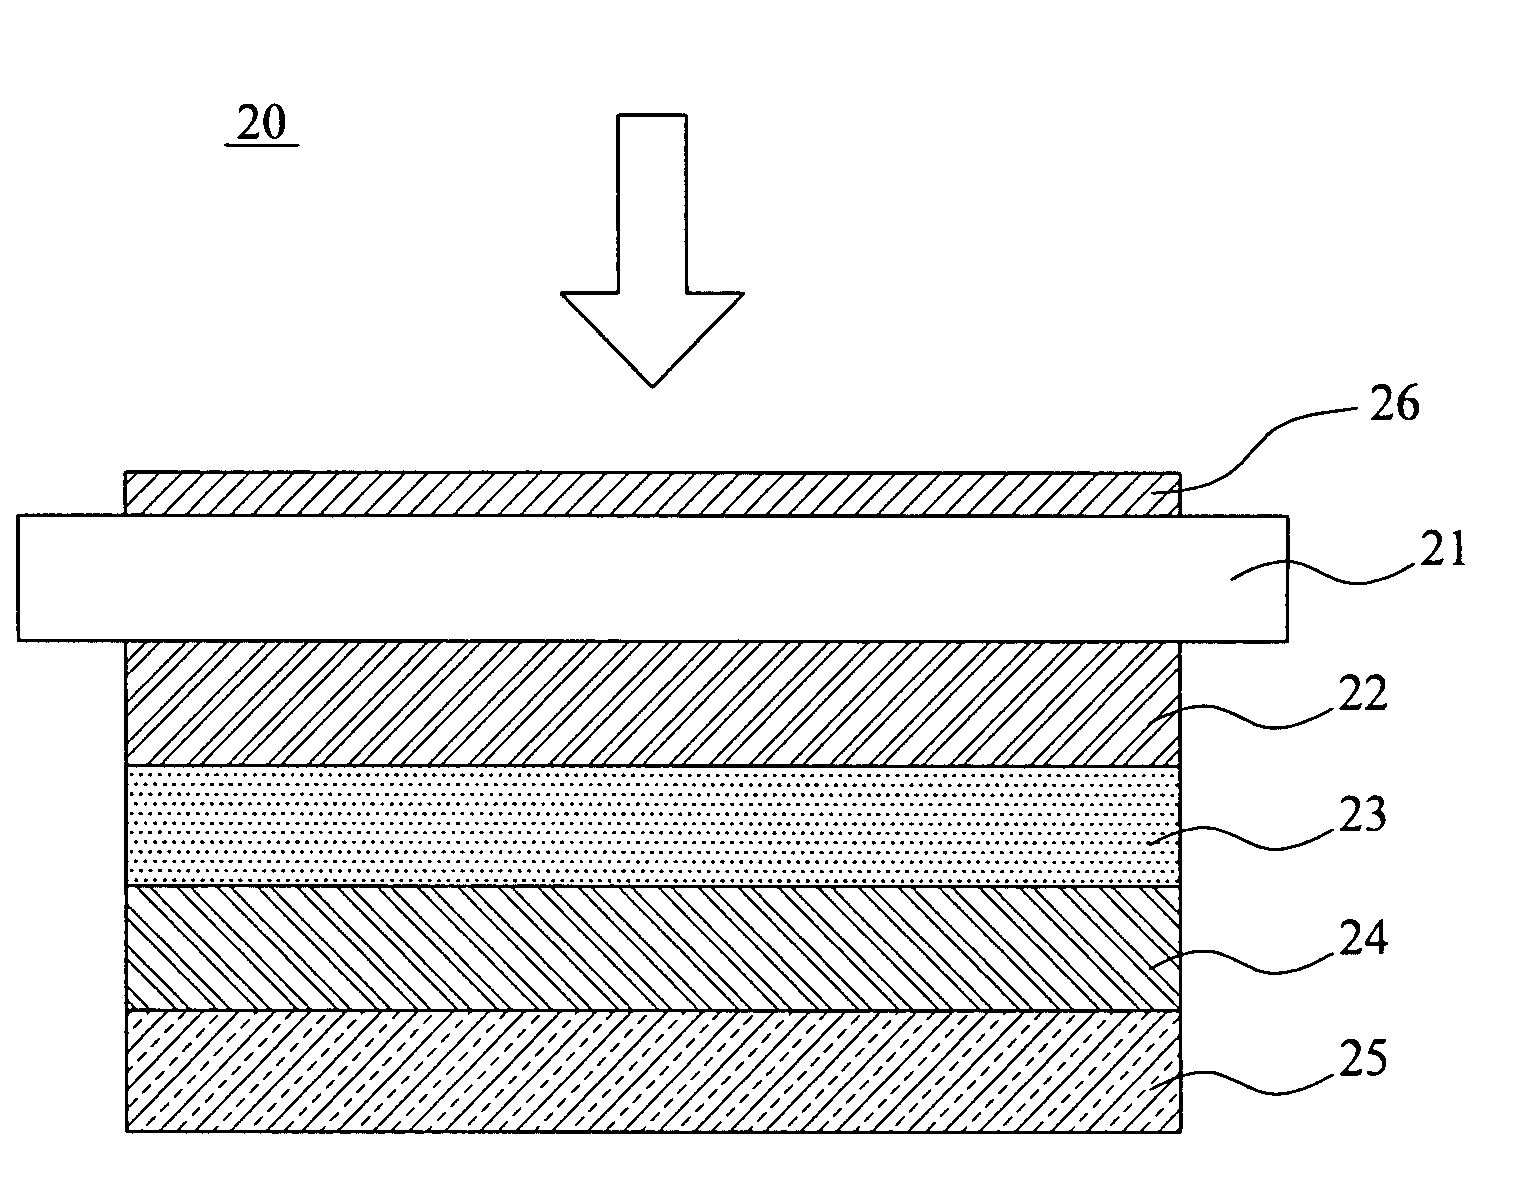 Thin Film Solar Cell Having Photo-Luminescent Medium Coated Therein And Method For Fabricating The Same